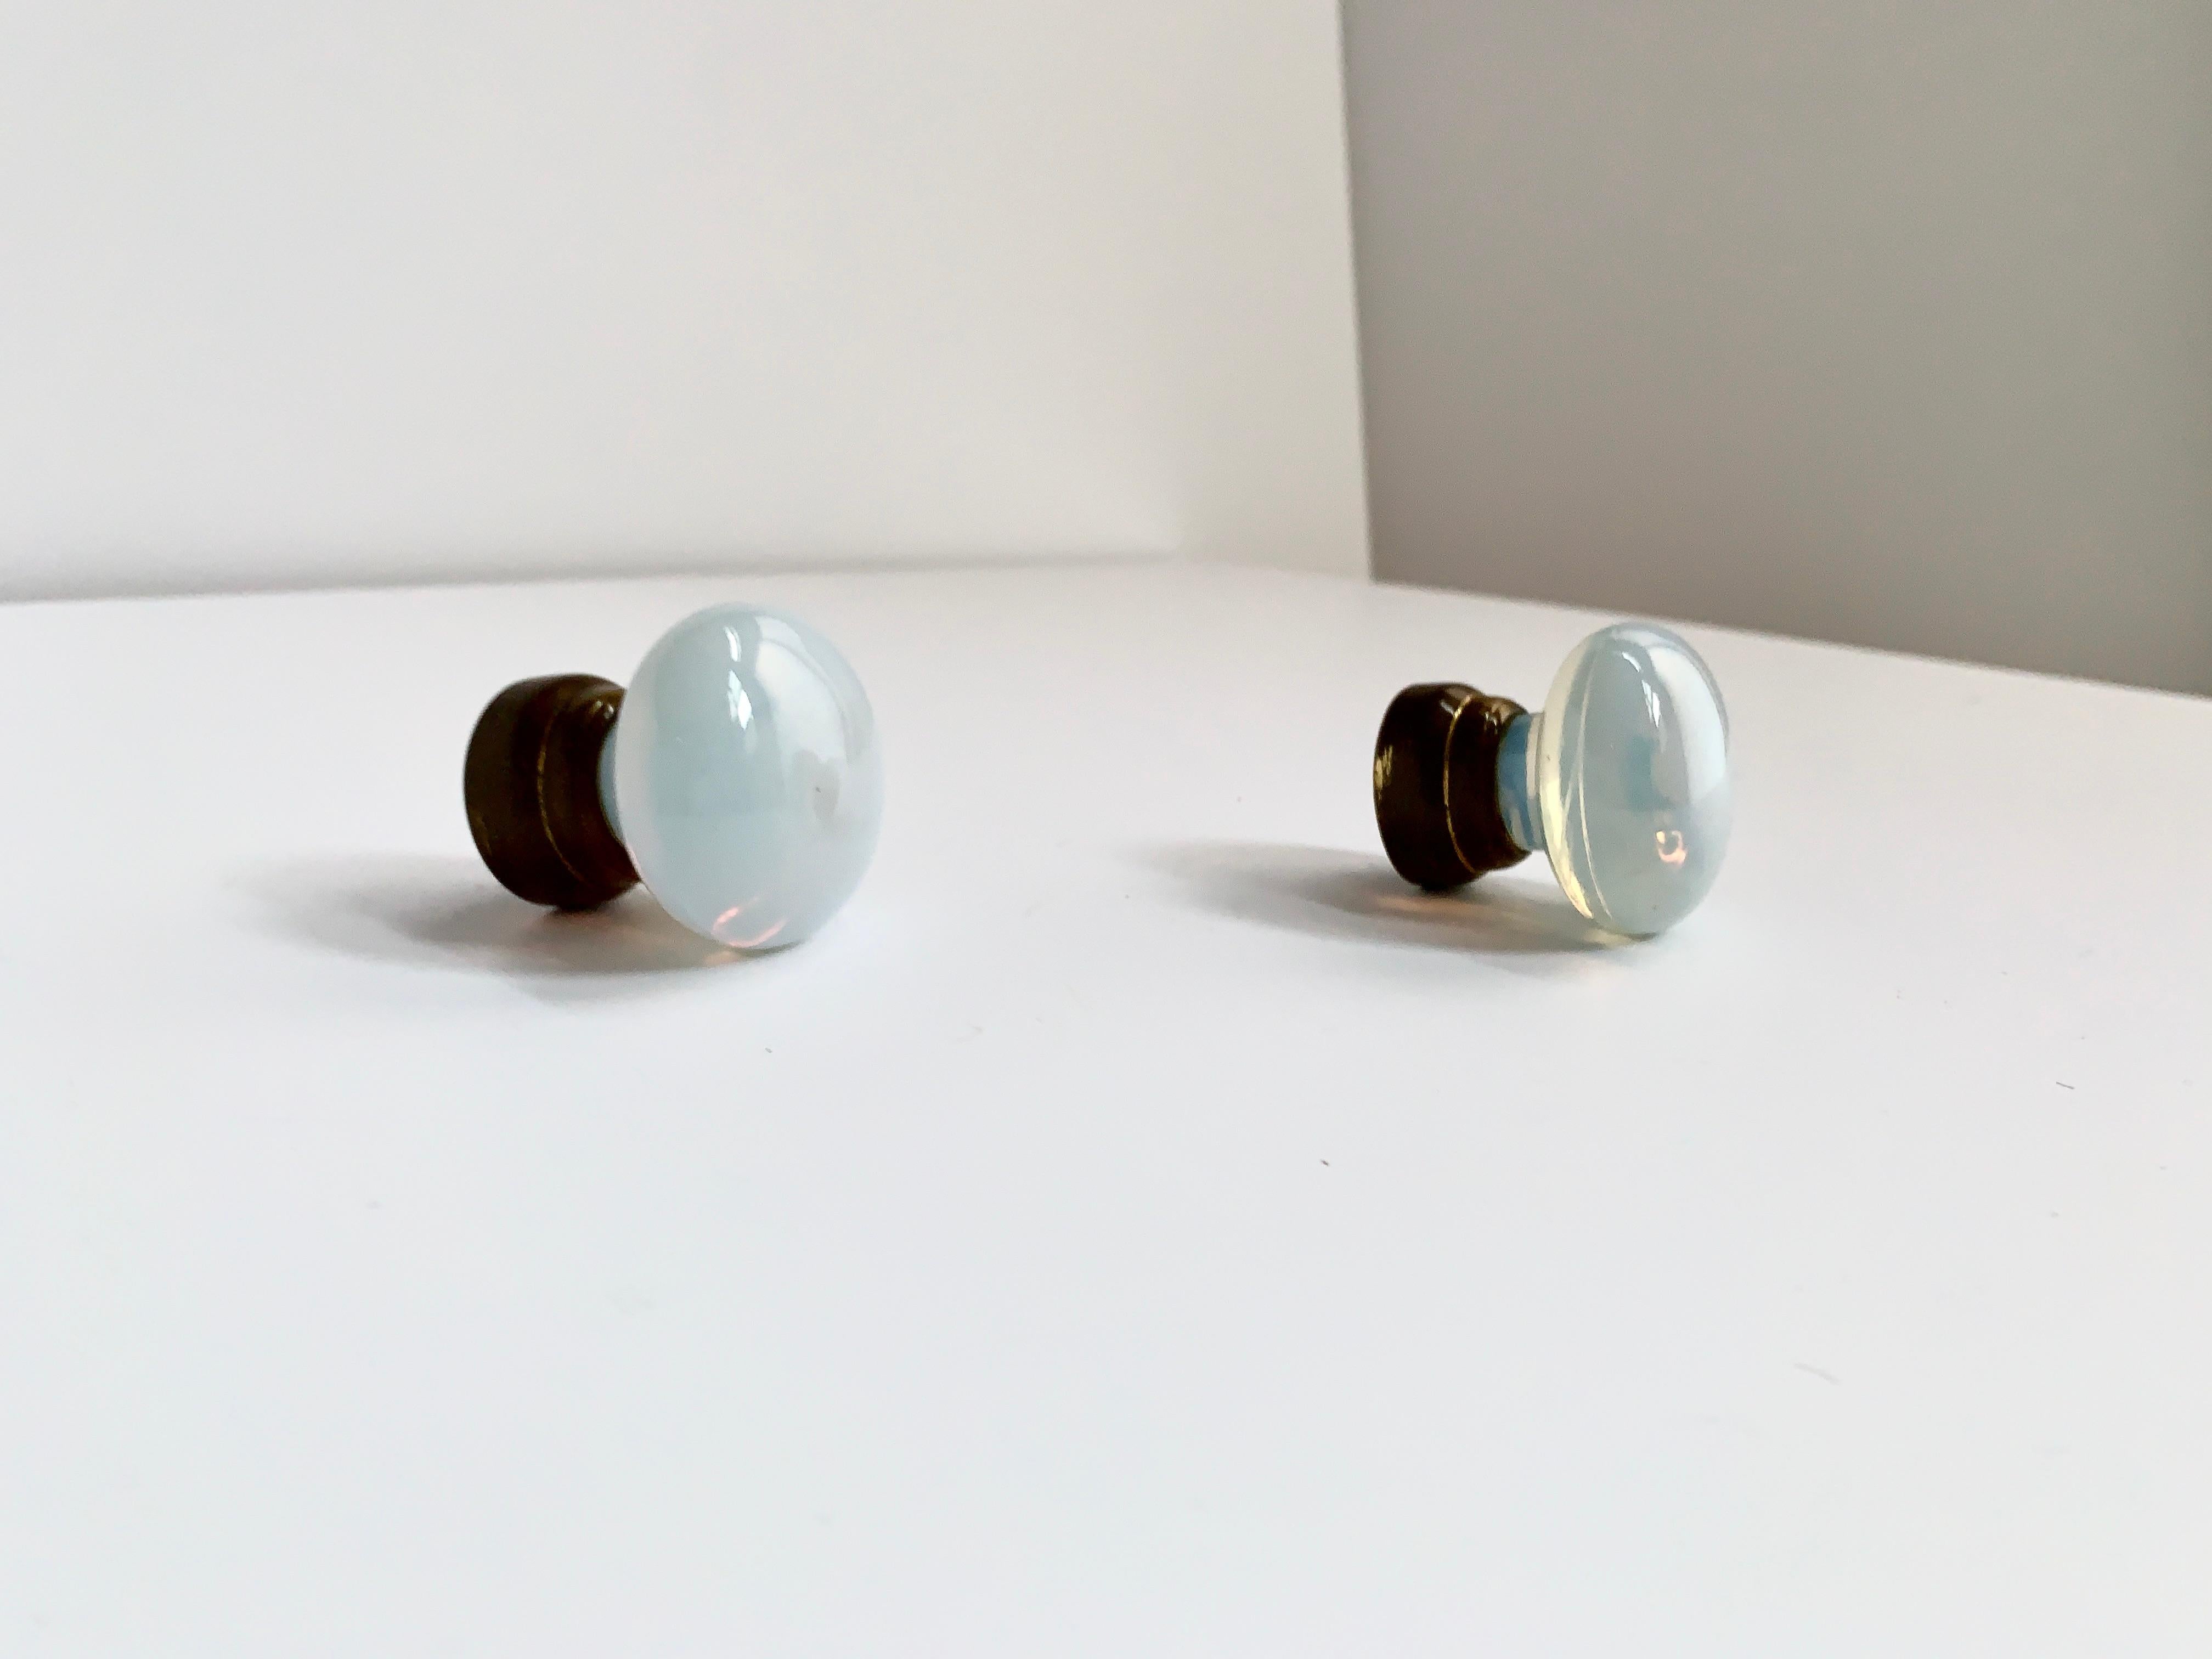 Vintage opaline art glass knob handle set of 2, bronzed brass base, 1960s. Quite heavyweight /. Substantial. Radiant, dazzling opaline. Art Deco delight, but hardware appears to be midcentury. Most likely Portuguese or Spanish production.